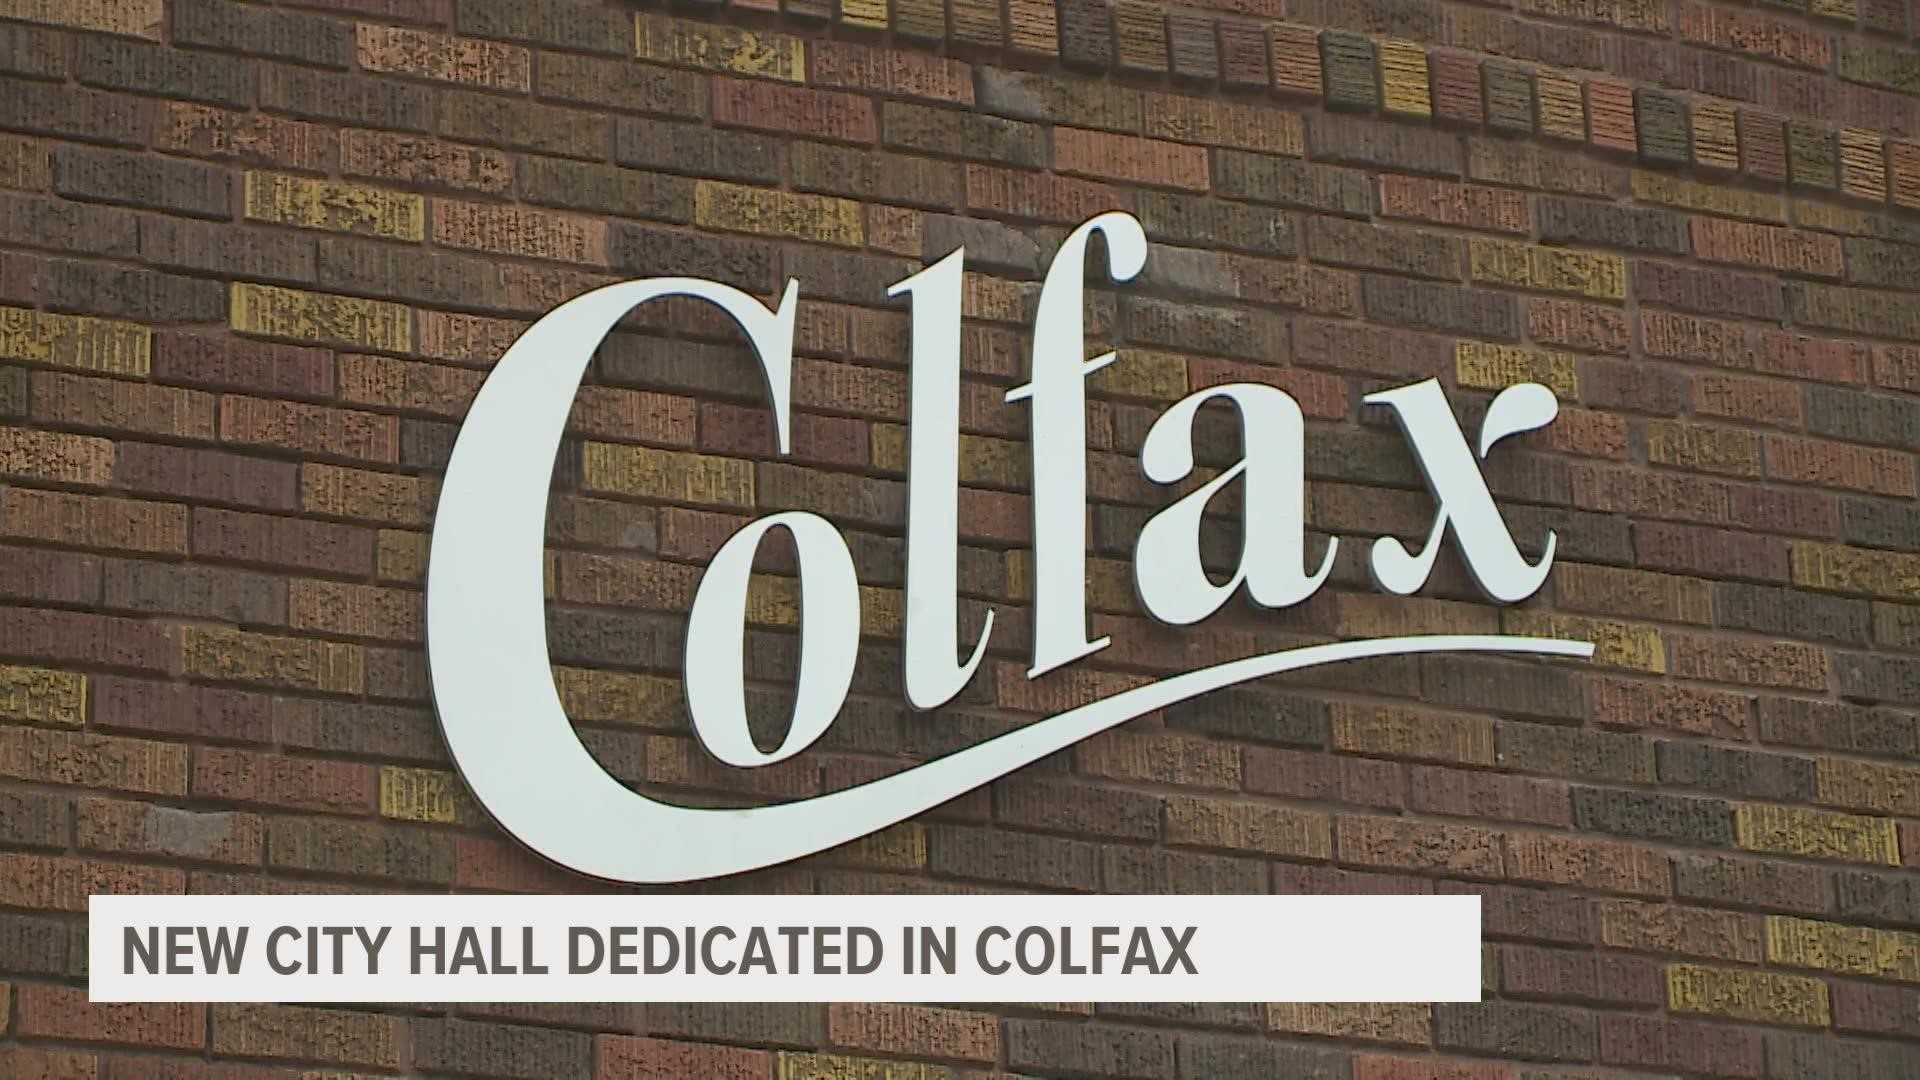 Two other changes happened on Friday for the City of Colfax. Following the tree planting, Mayor David Mast raised the city's brand new flag for the first time.